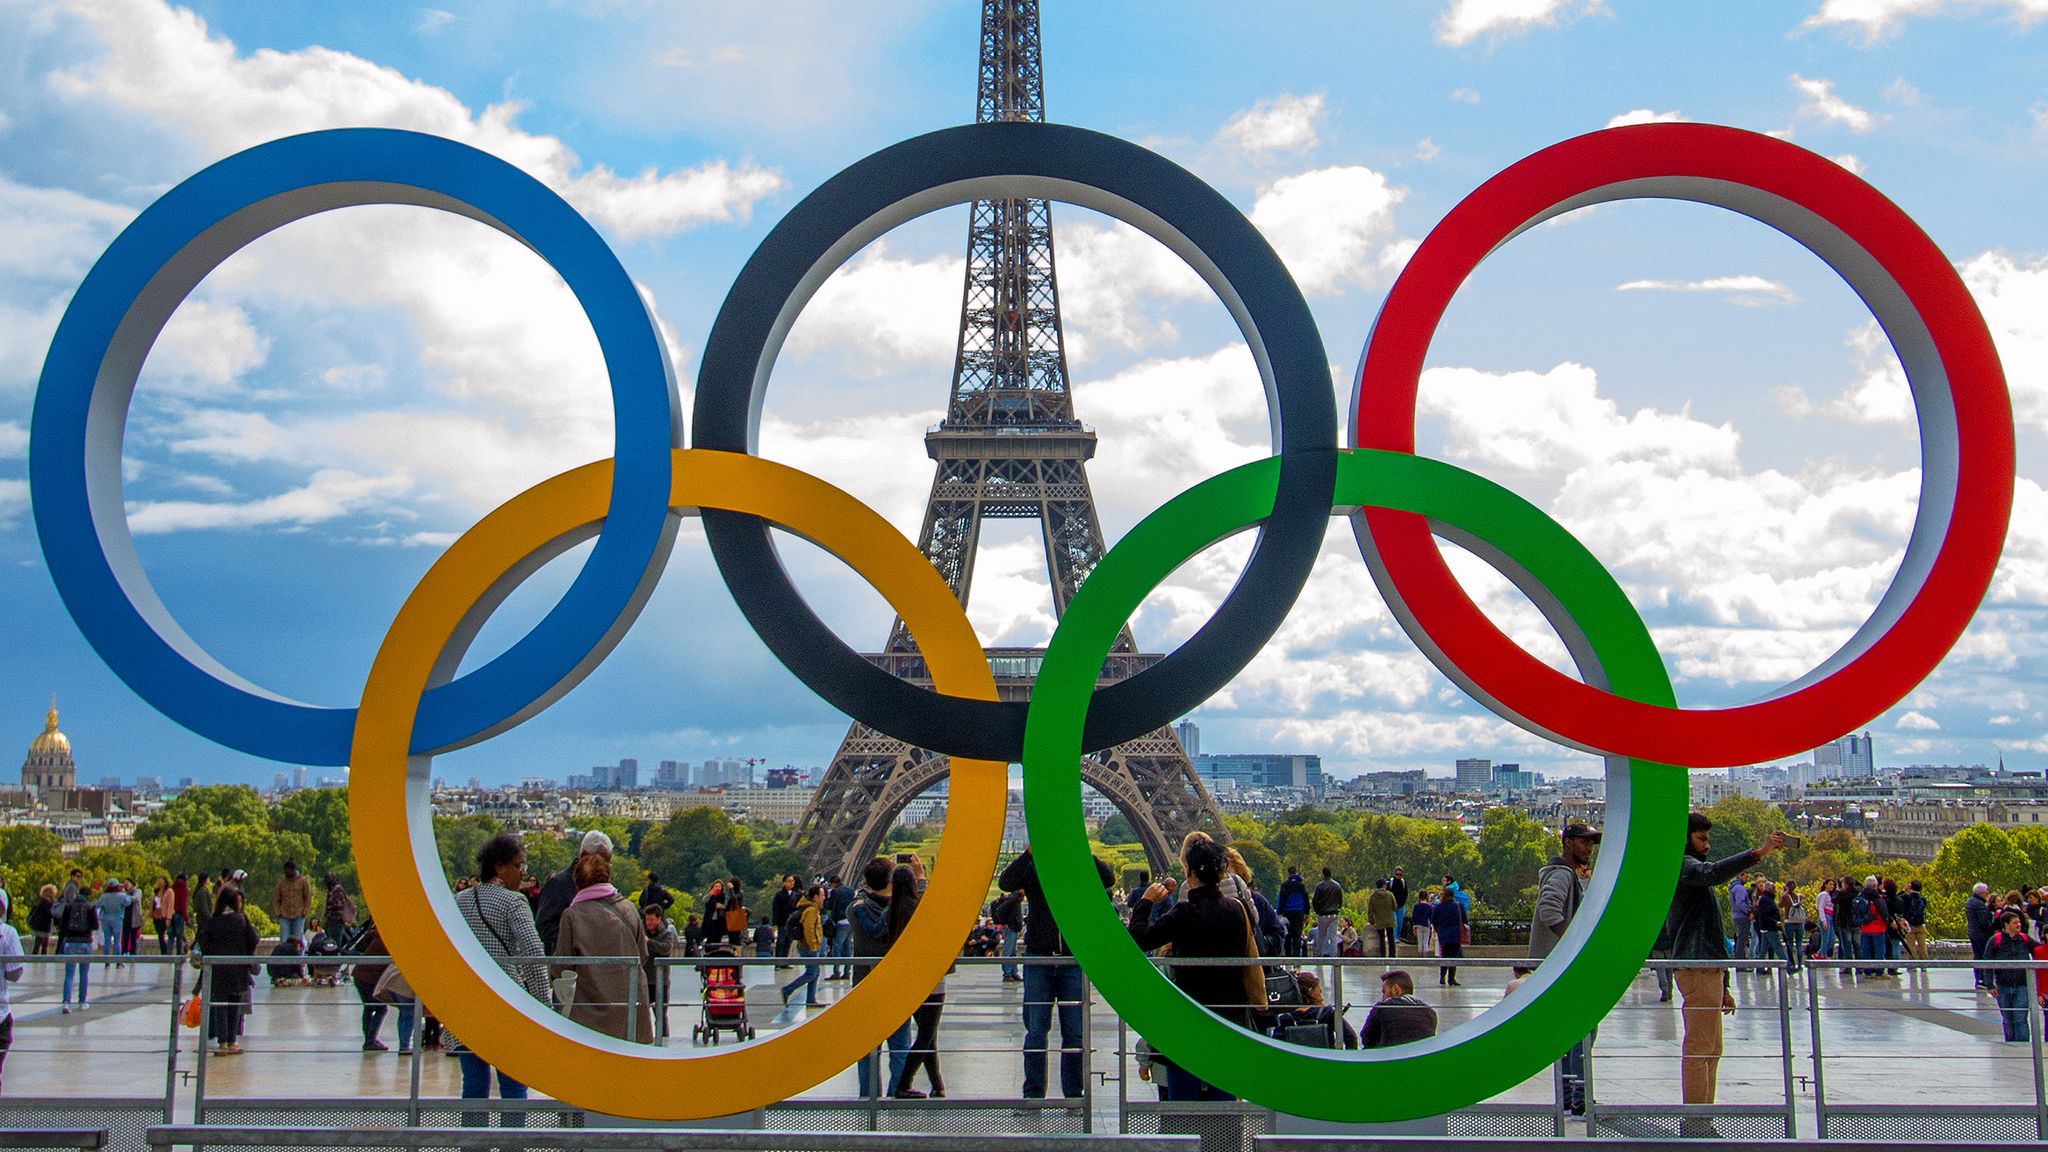 Global Mobility and the Paris Olympics